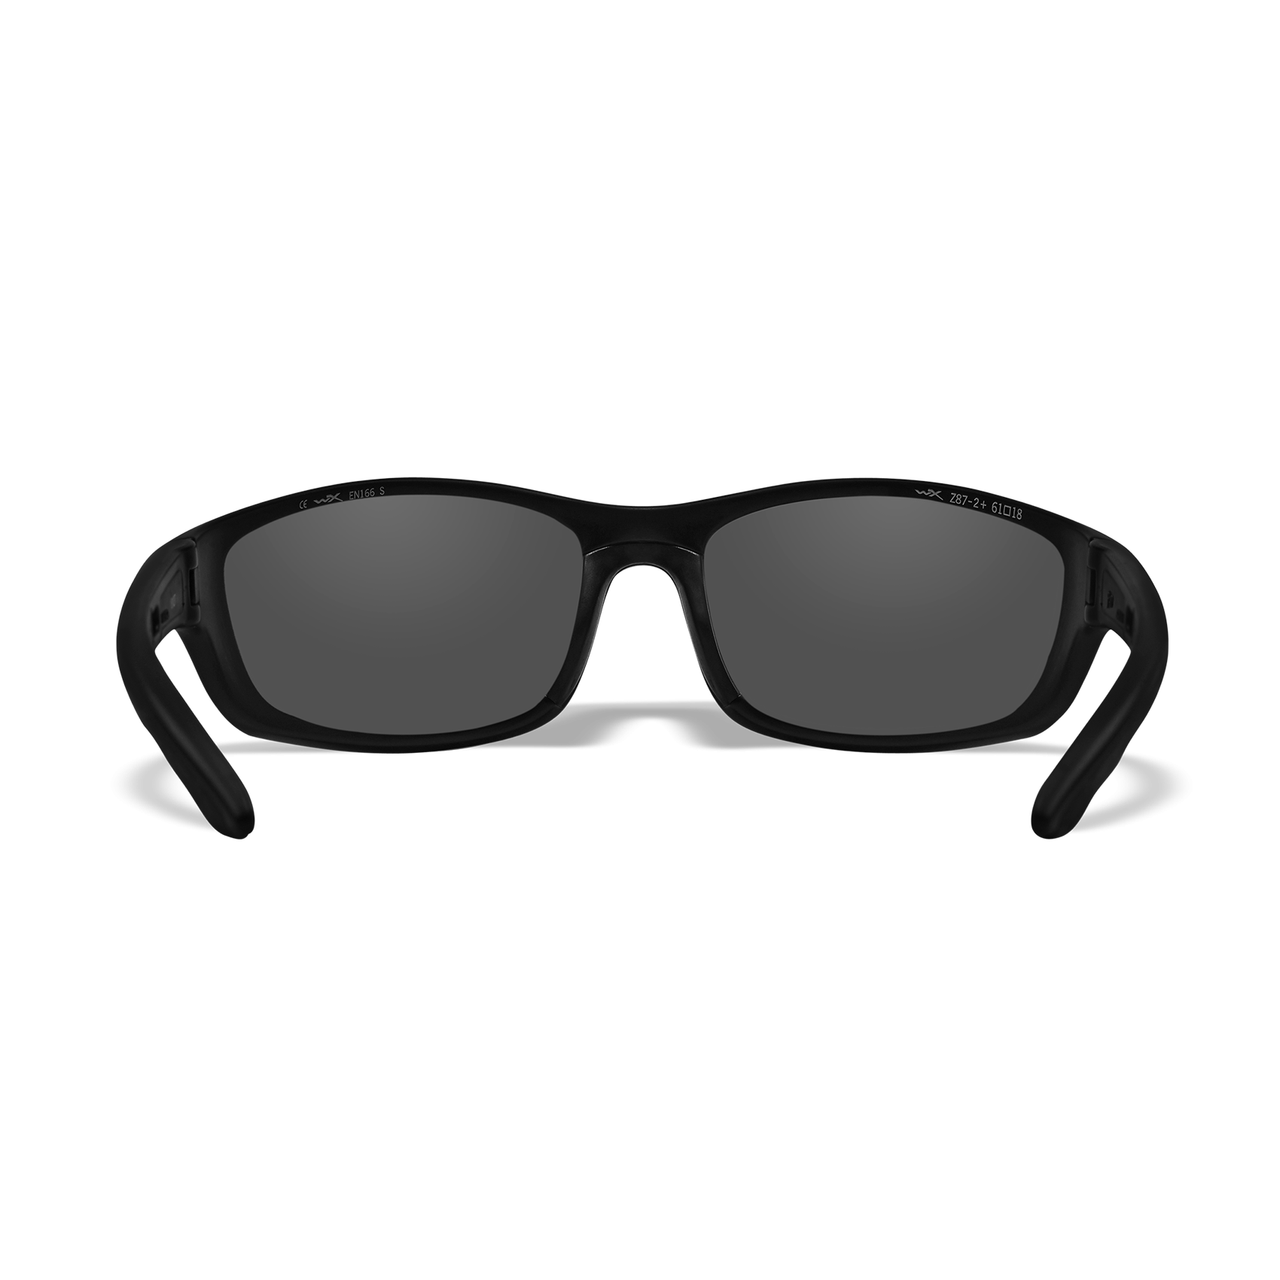 Wiley X P-17M Black Ops Safety Sunglasses Interior Lenses